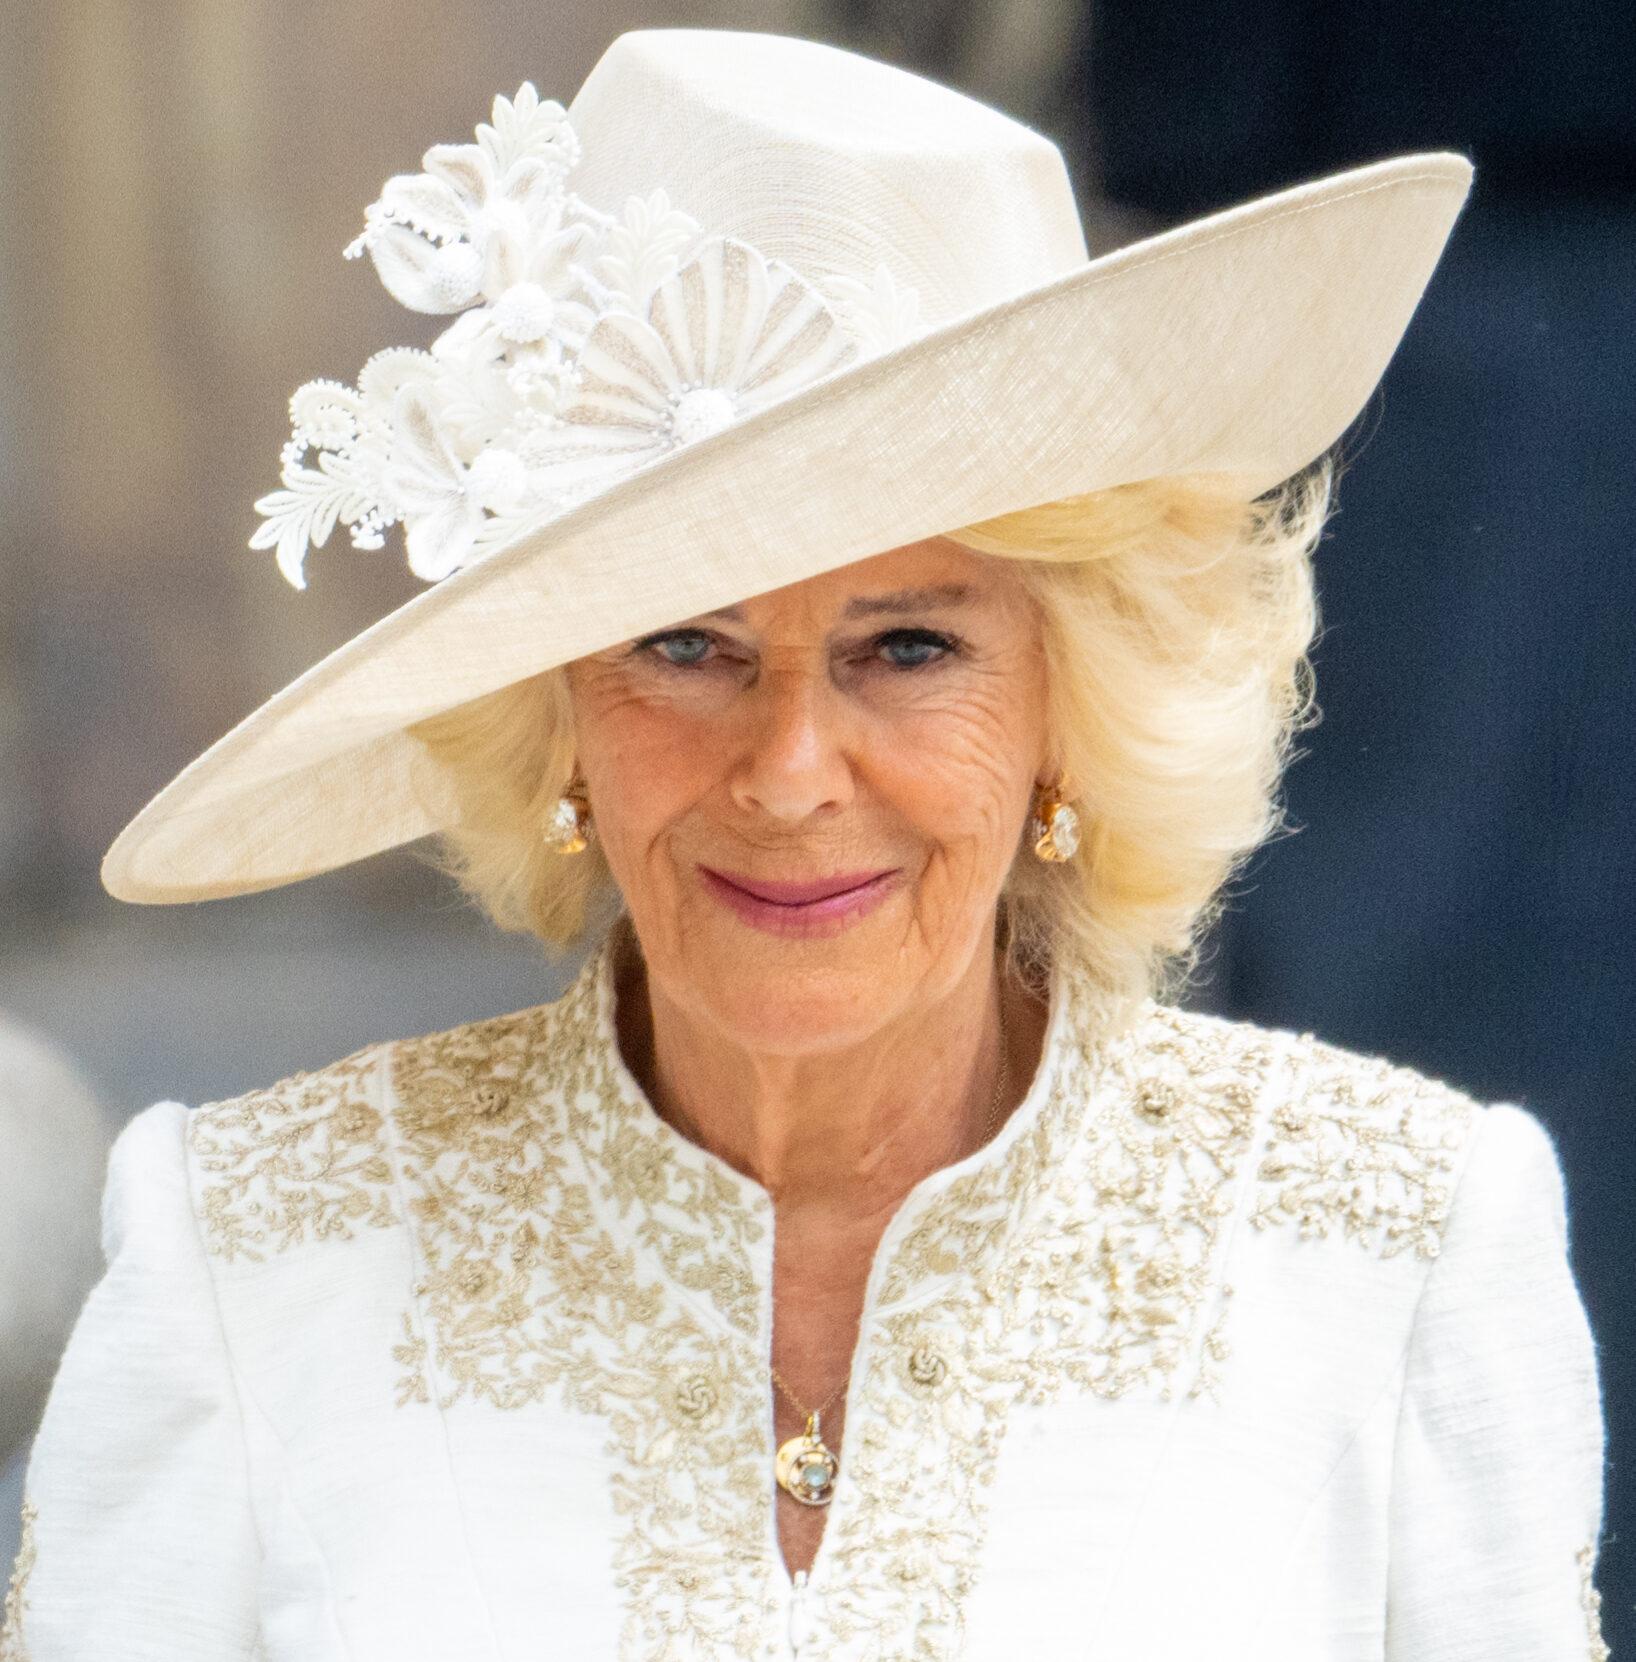 Camilla Duchess of Cornwall attending the Service of Thanksgiving for the Queen, marking the monarch's 70 year Platinum Jubilee, at St Paul’s Cathedral in London.